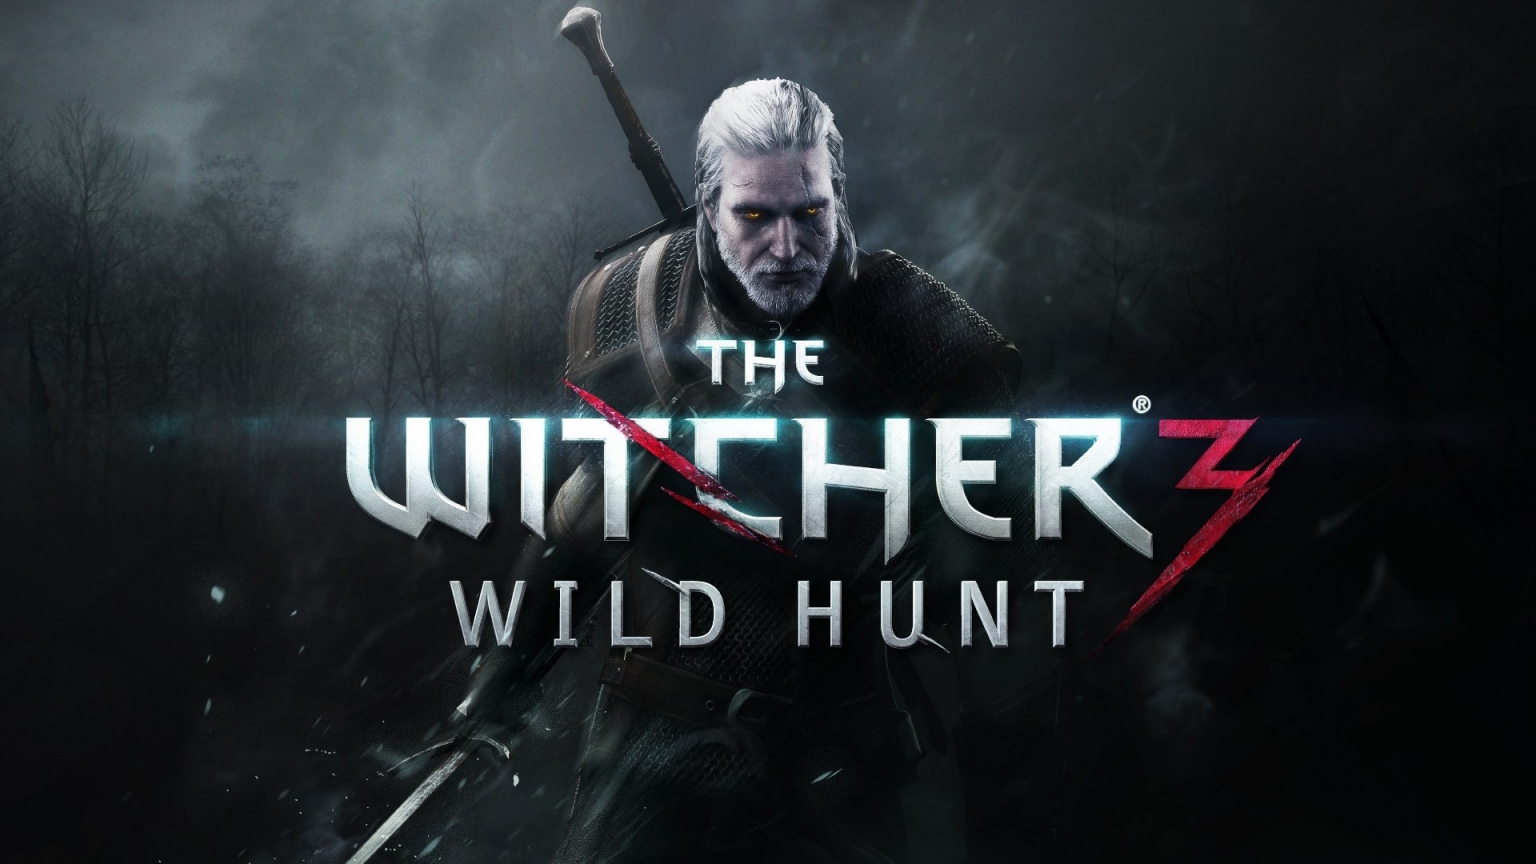 The Witcher 3 for 1536 x 864 HDTV resolution